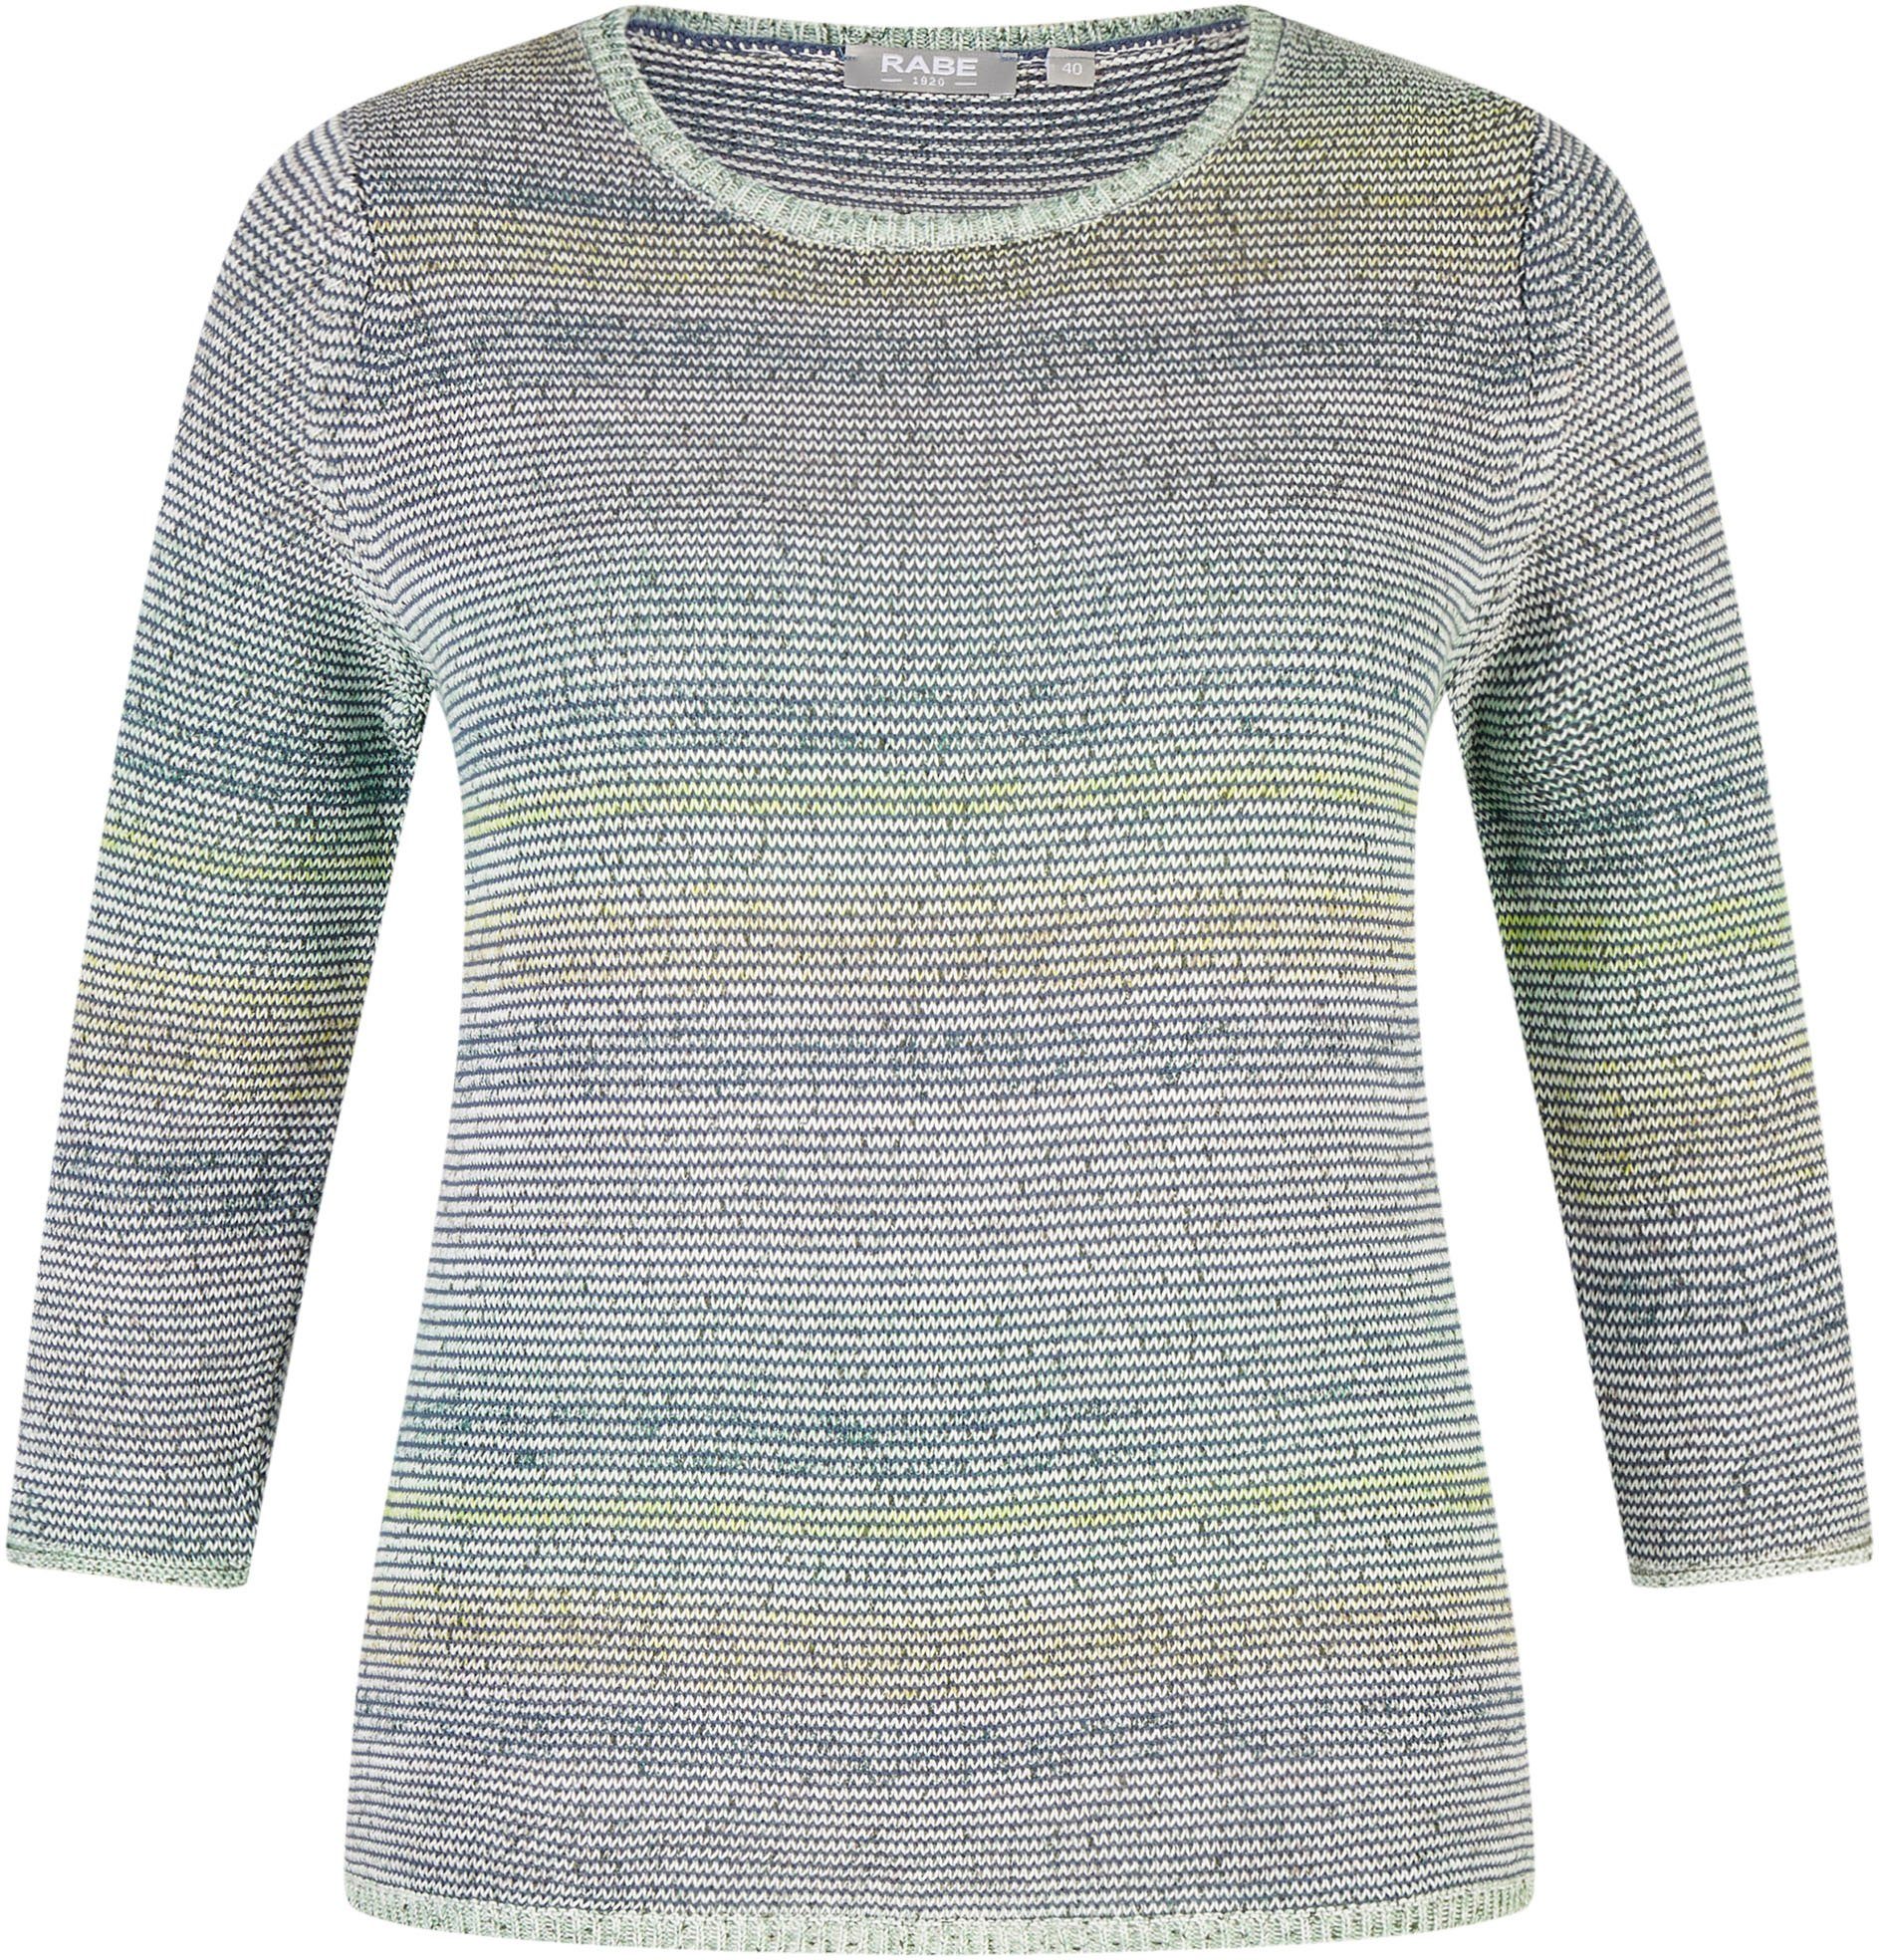 Rabe Strickpullover RABE MODEN,Pullover